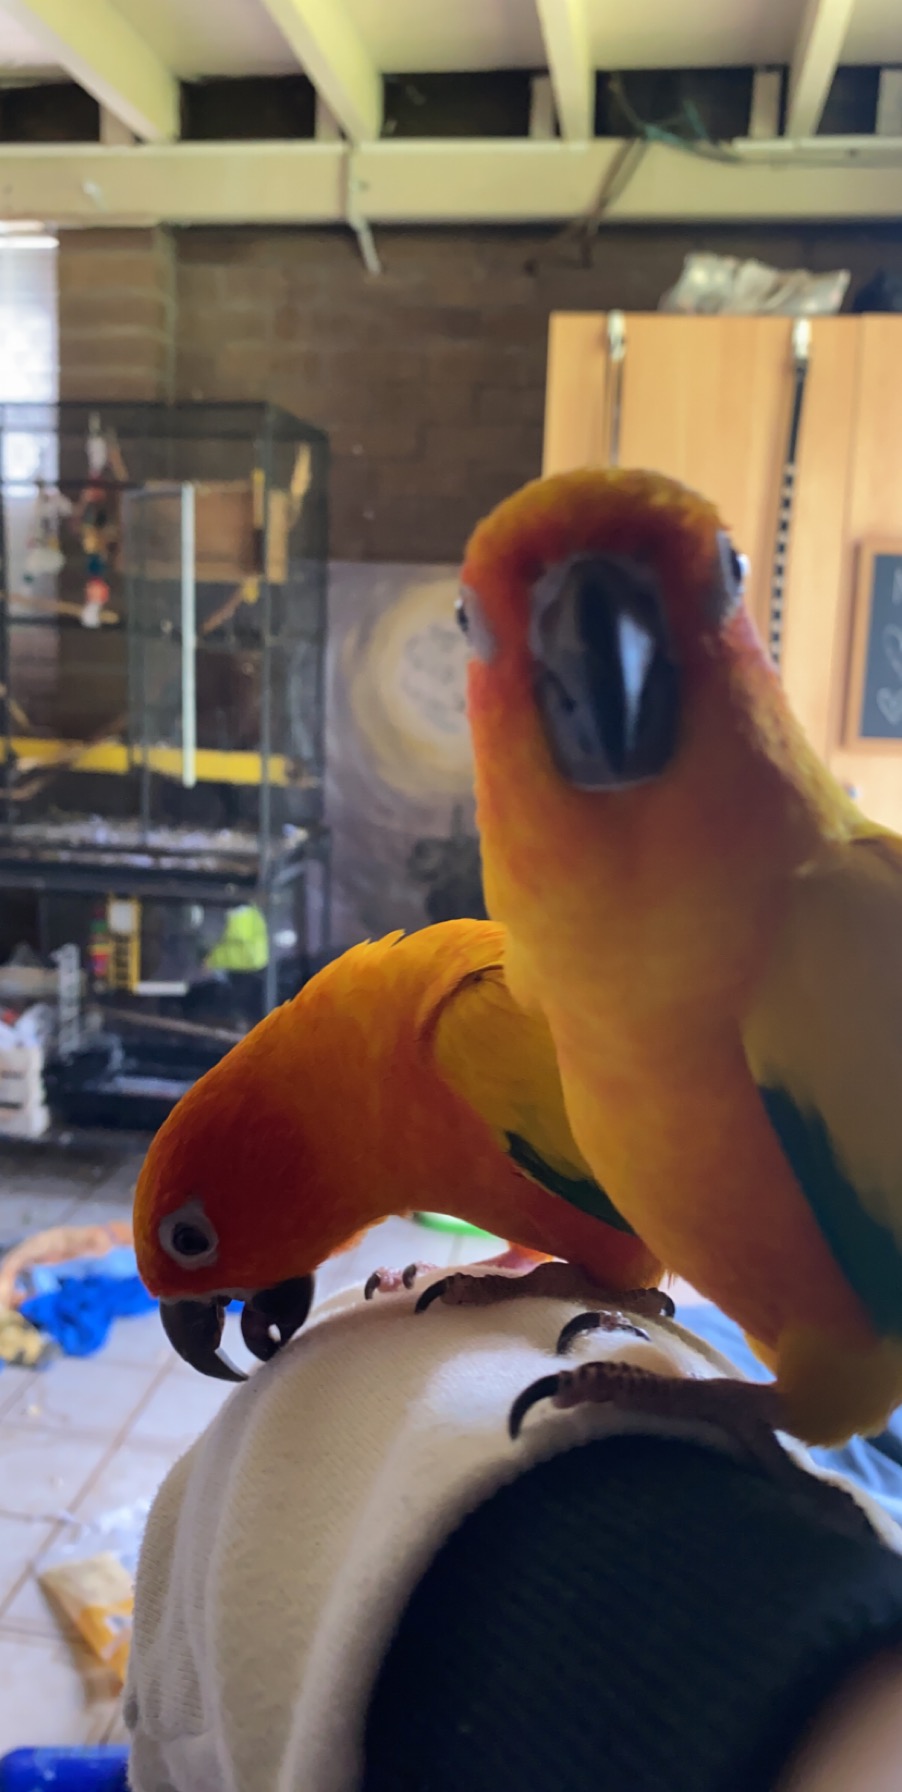 Bonded pair of sun conures